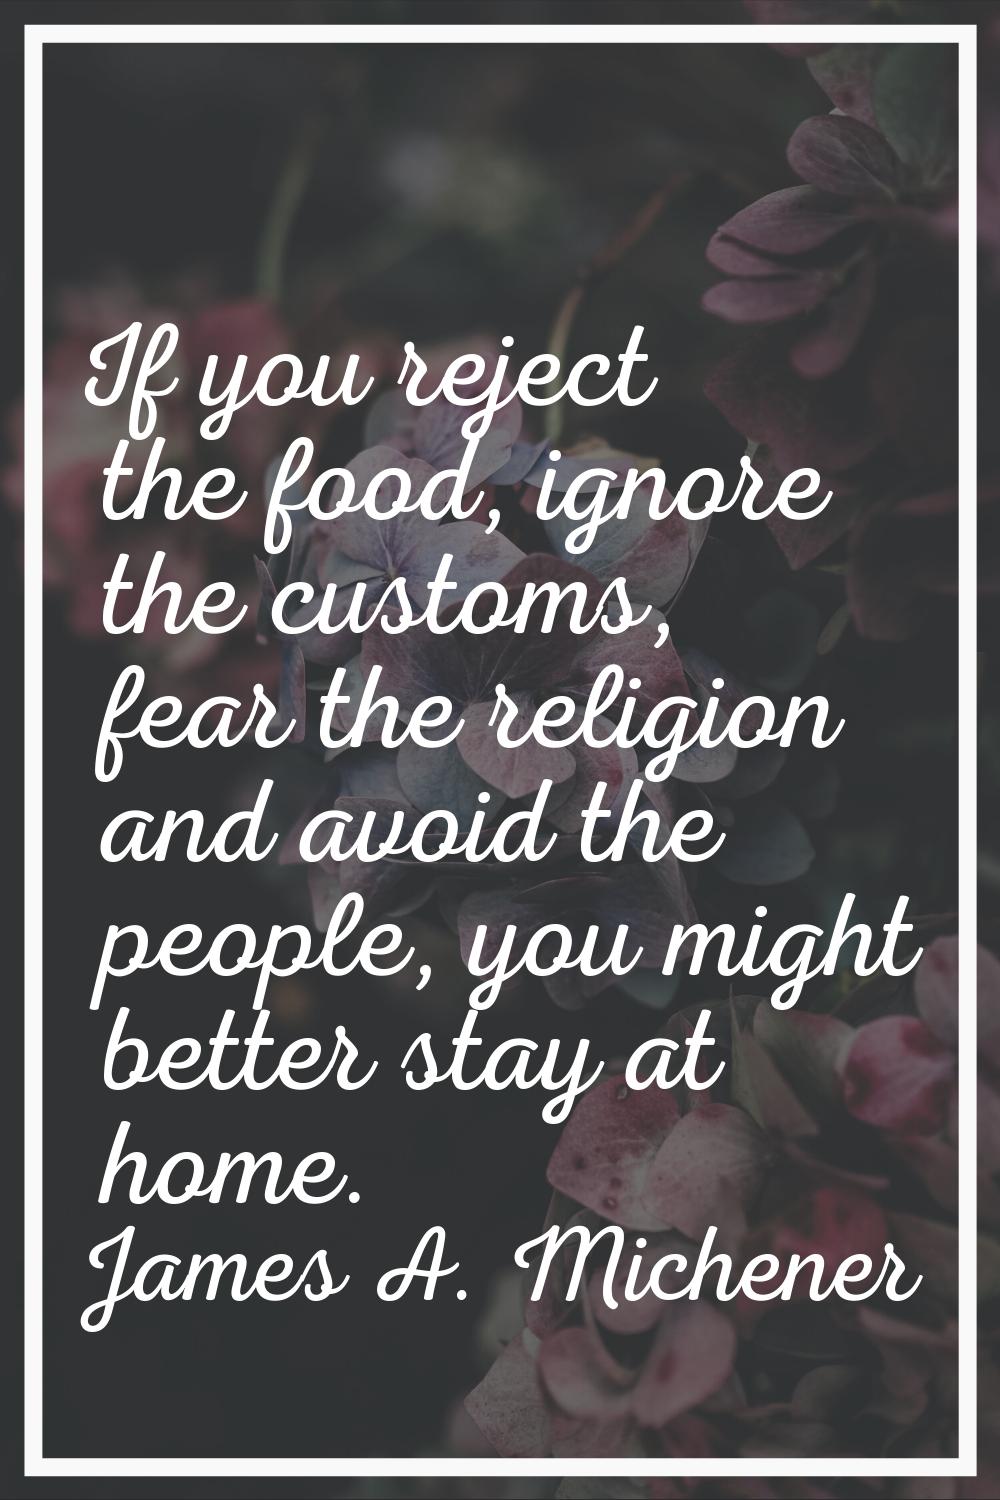 If you reject the food, ignore the customs, fear the religion and avoid the people, you might bette